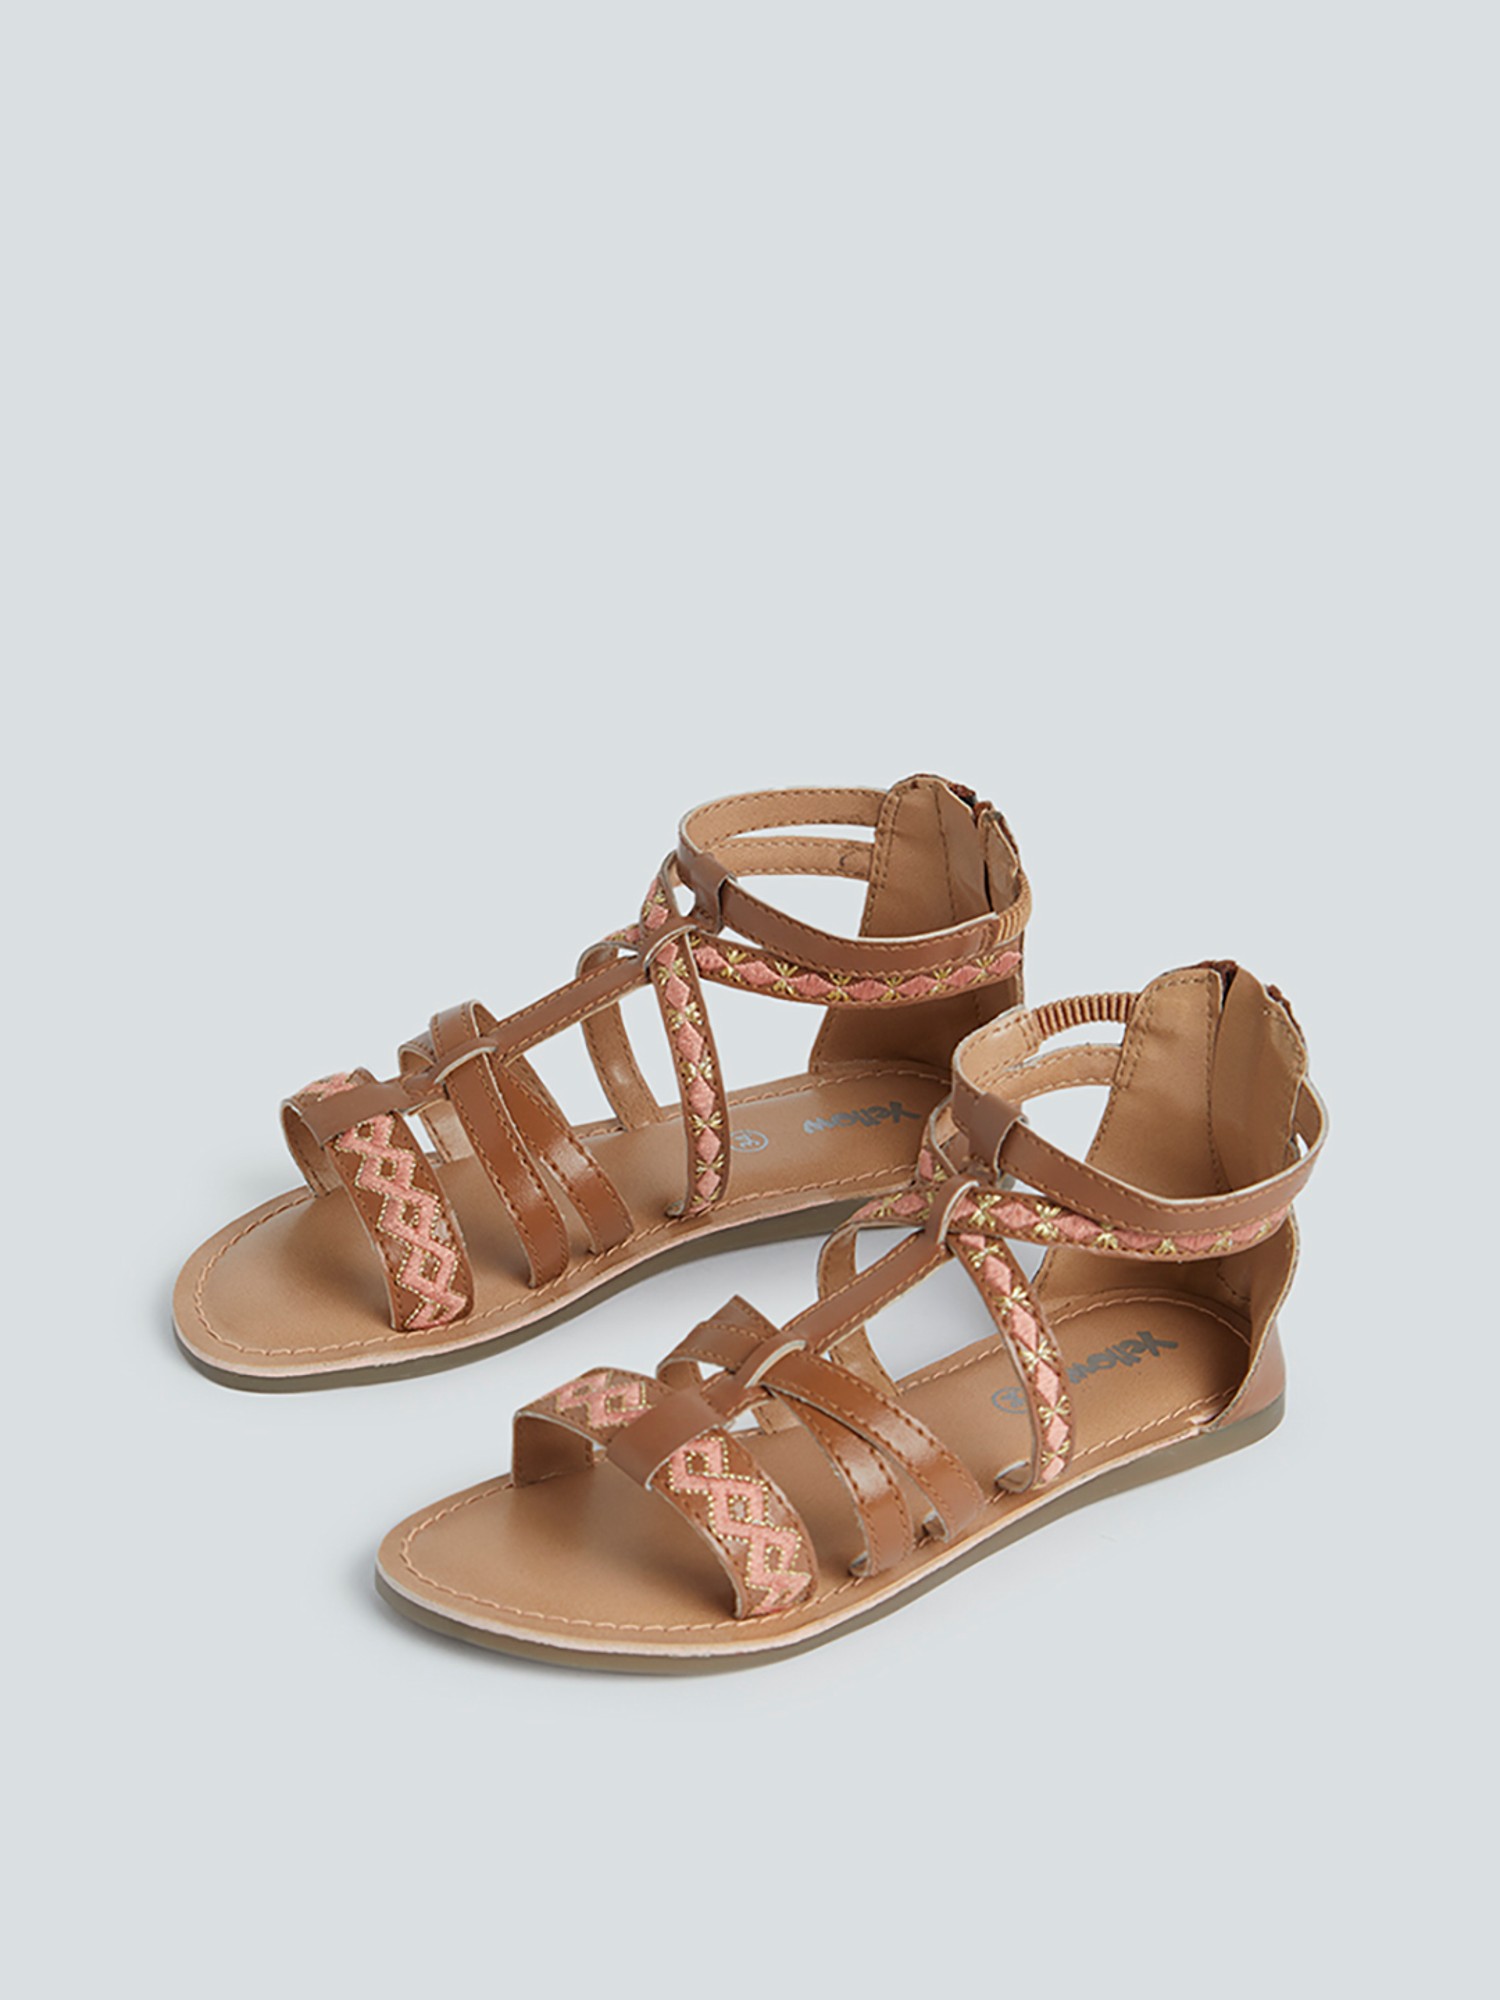 Brown Leather Sandals for Women | ASOS